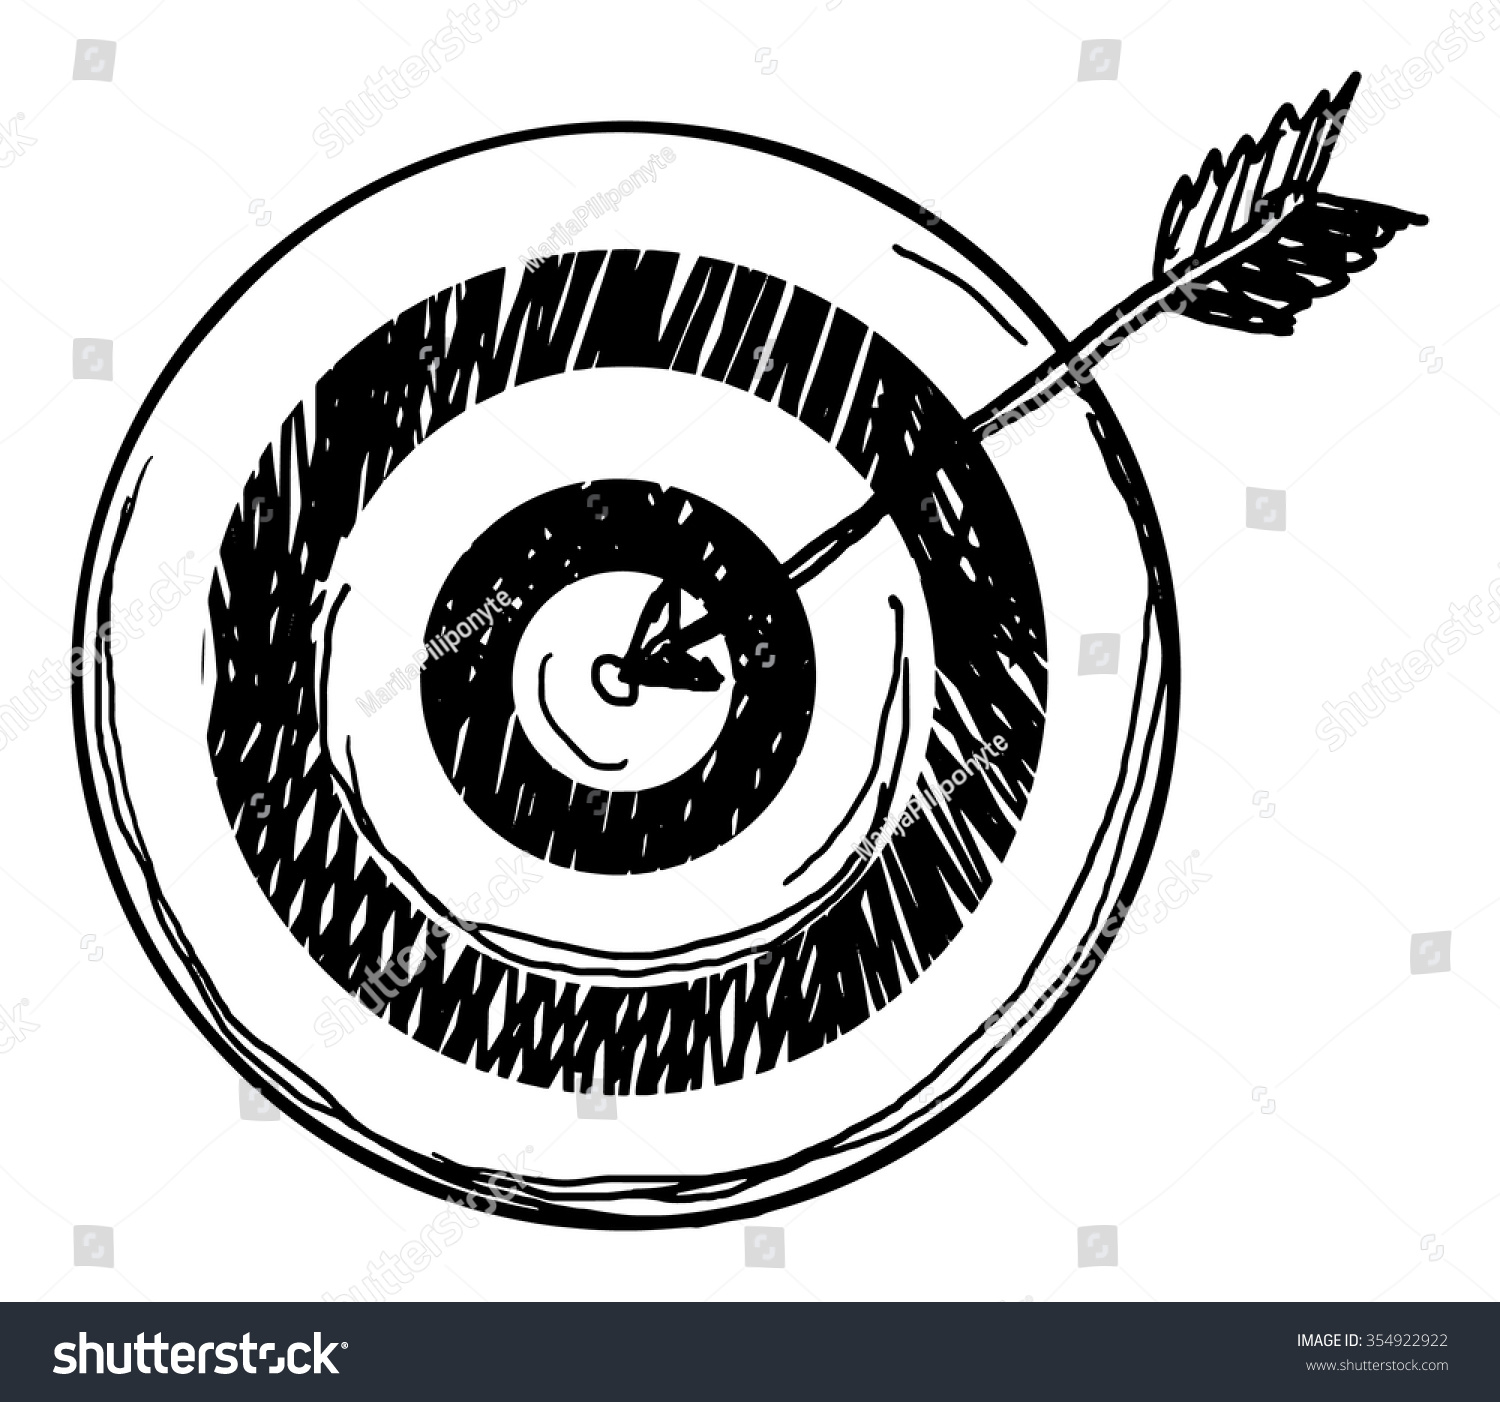 target clipart black and white - photo #24